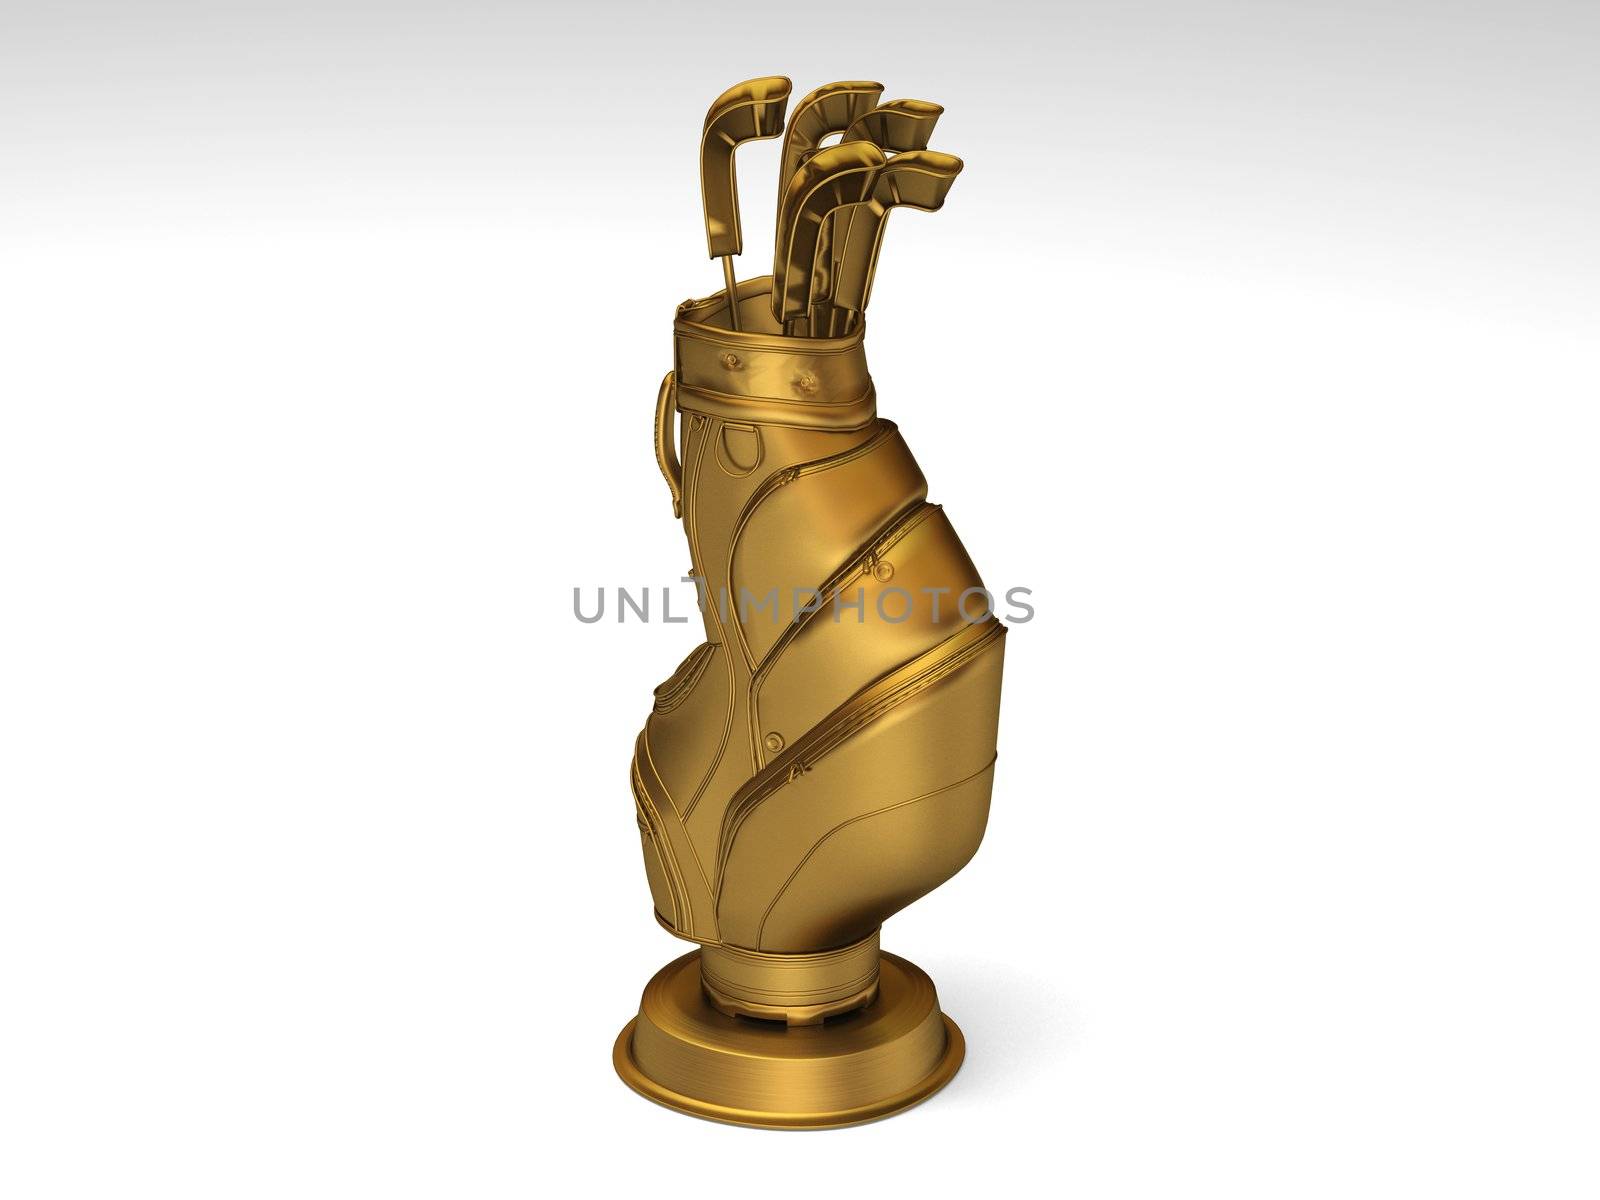 Golden golf trophy by shkyo30